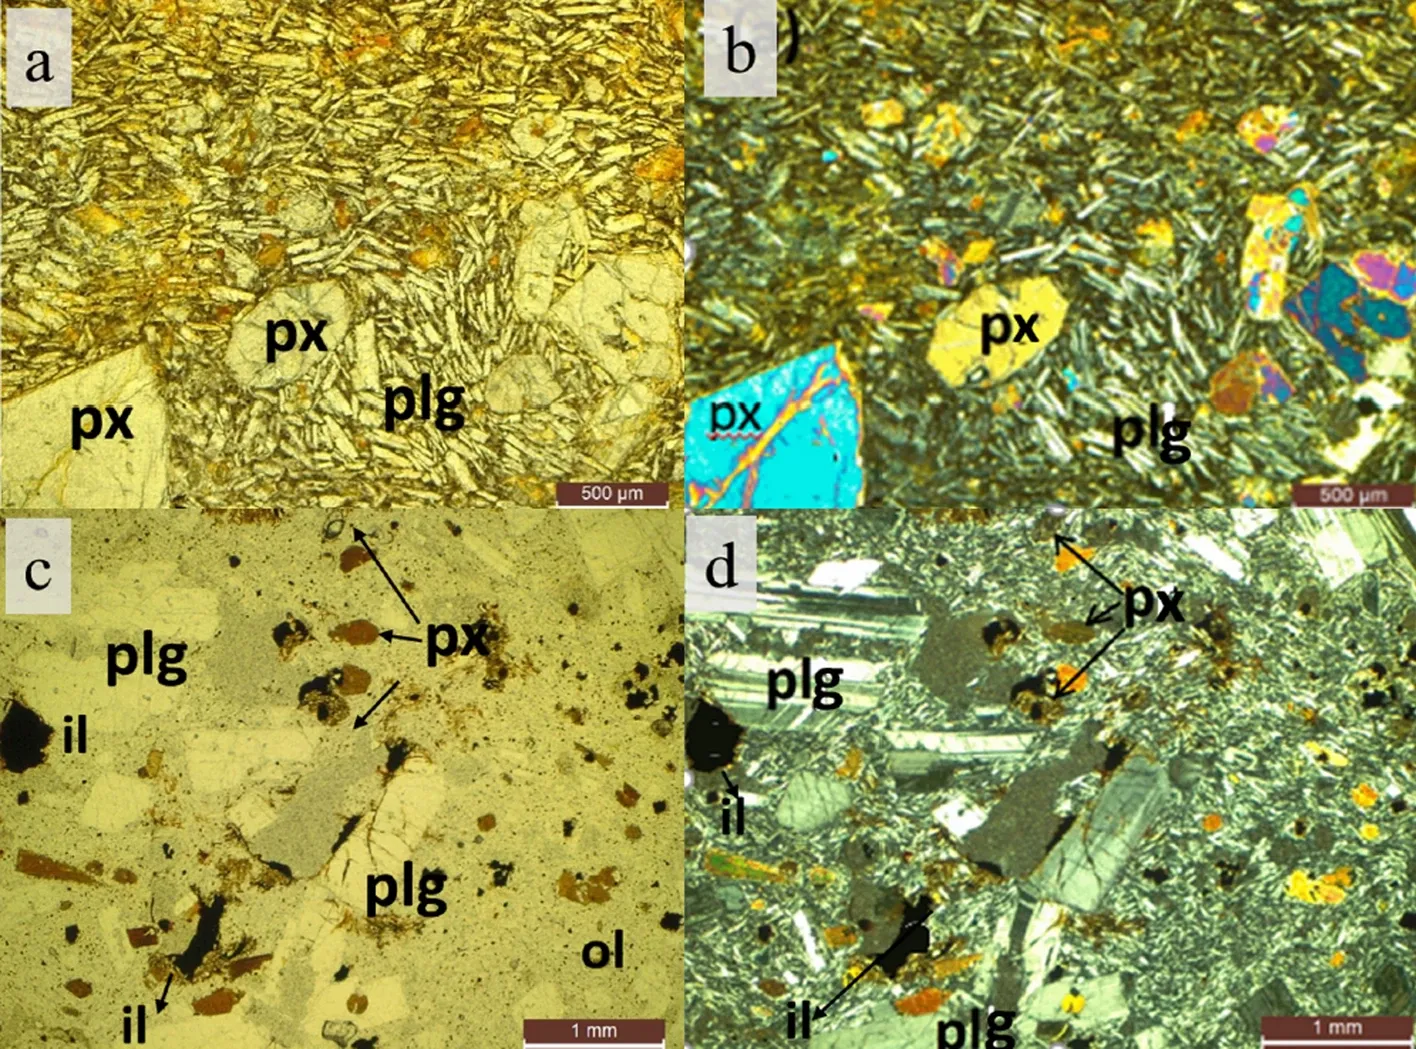 Fig 2: Petrographic photomicrographs of BS2 rock sample under plane polarized (a, c) and cross polarized light (b, d). px: clinopyroxene, plg: plagioclase, il: ilmenite